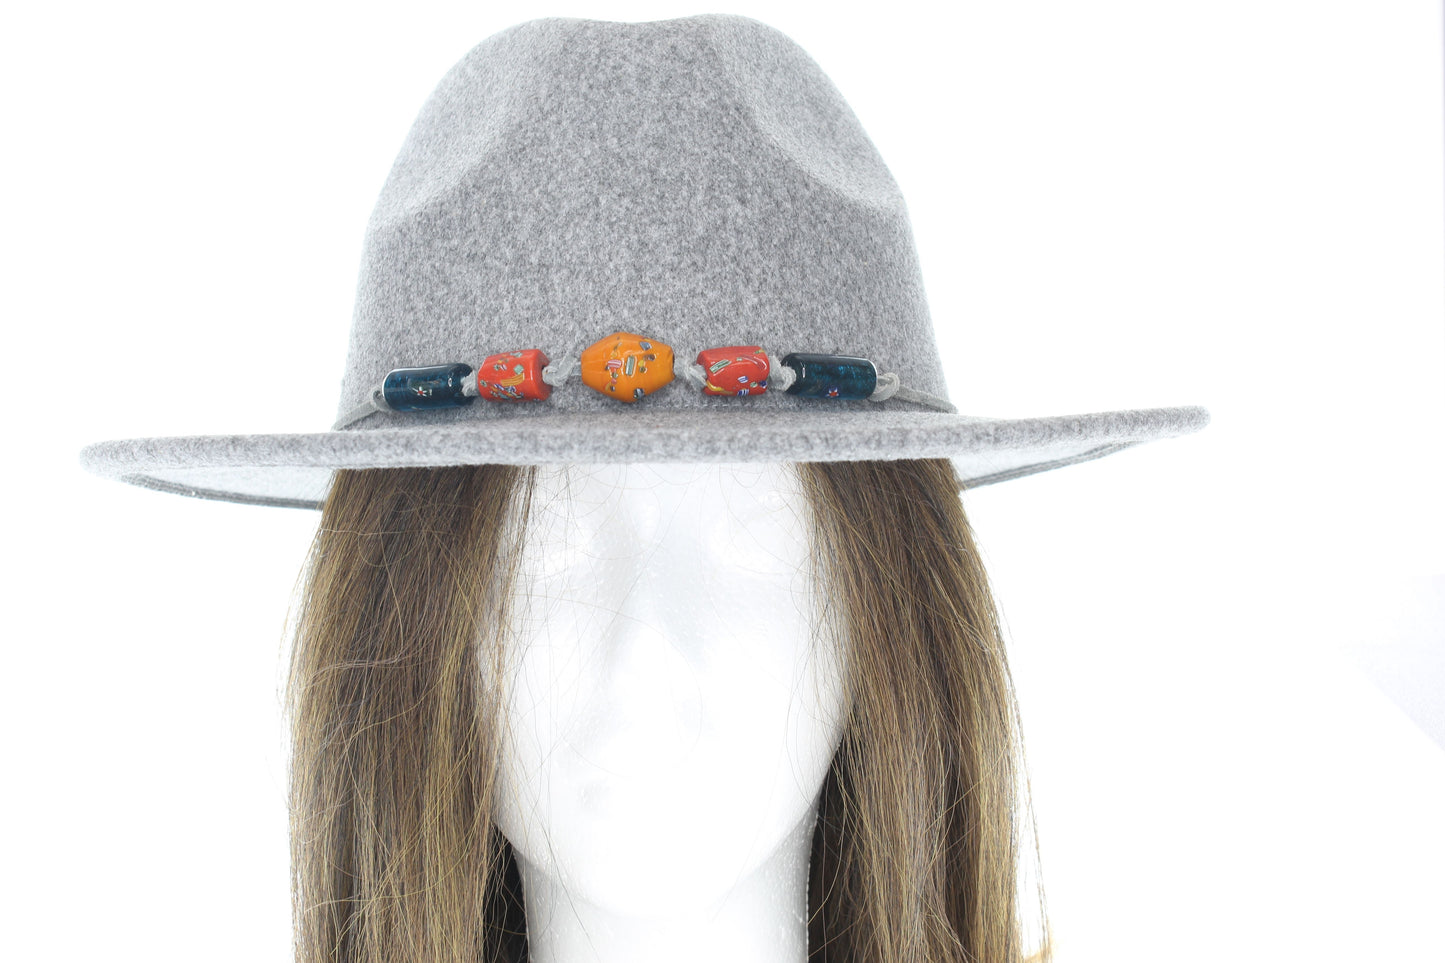 Assorted Beaded Hat Bands with selection of 5-7 beads, each